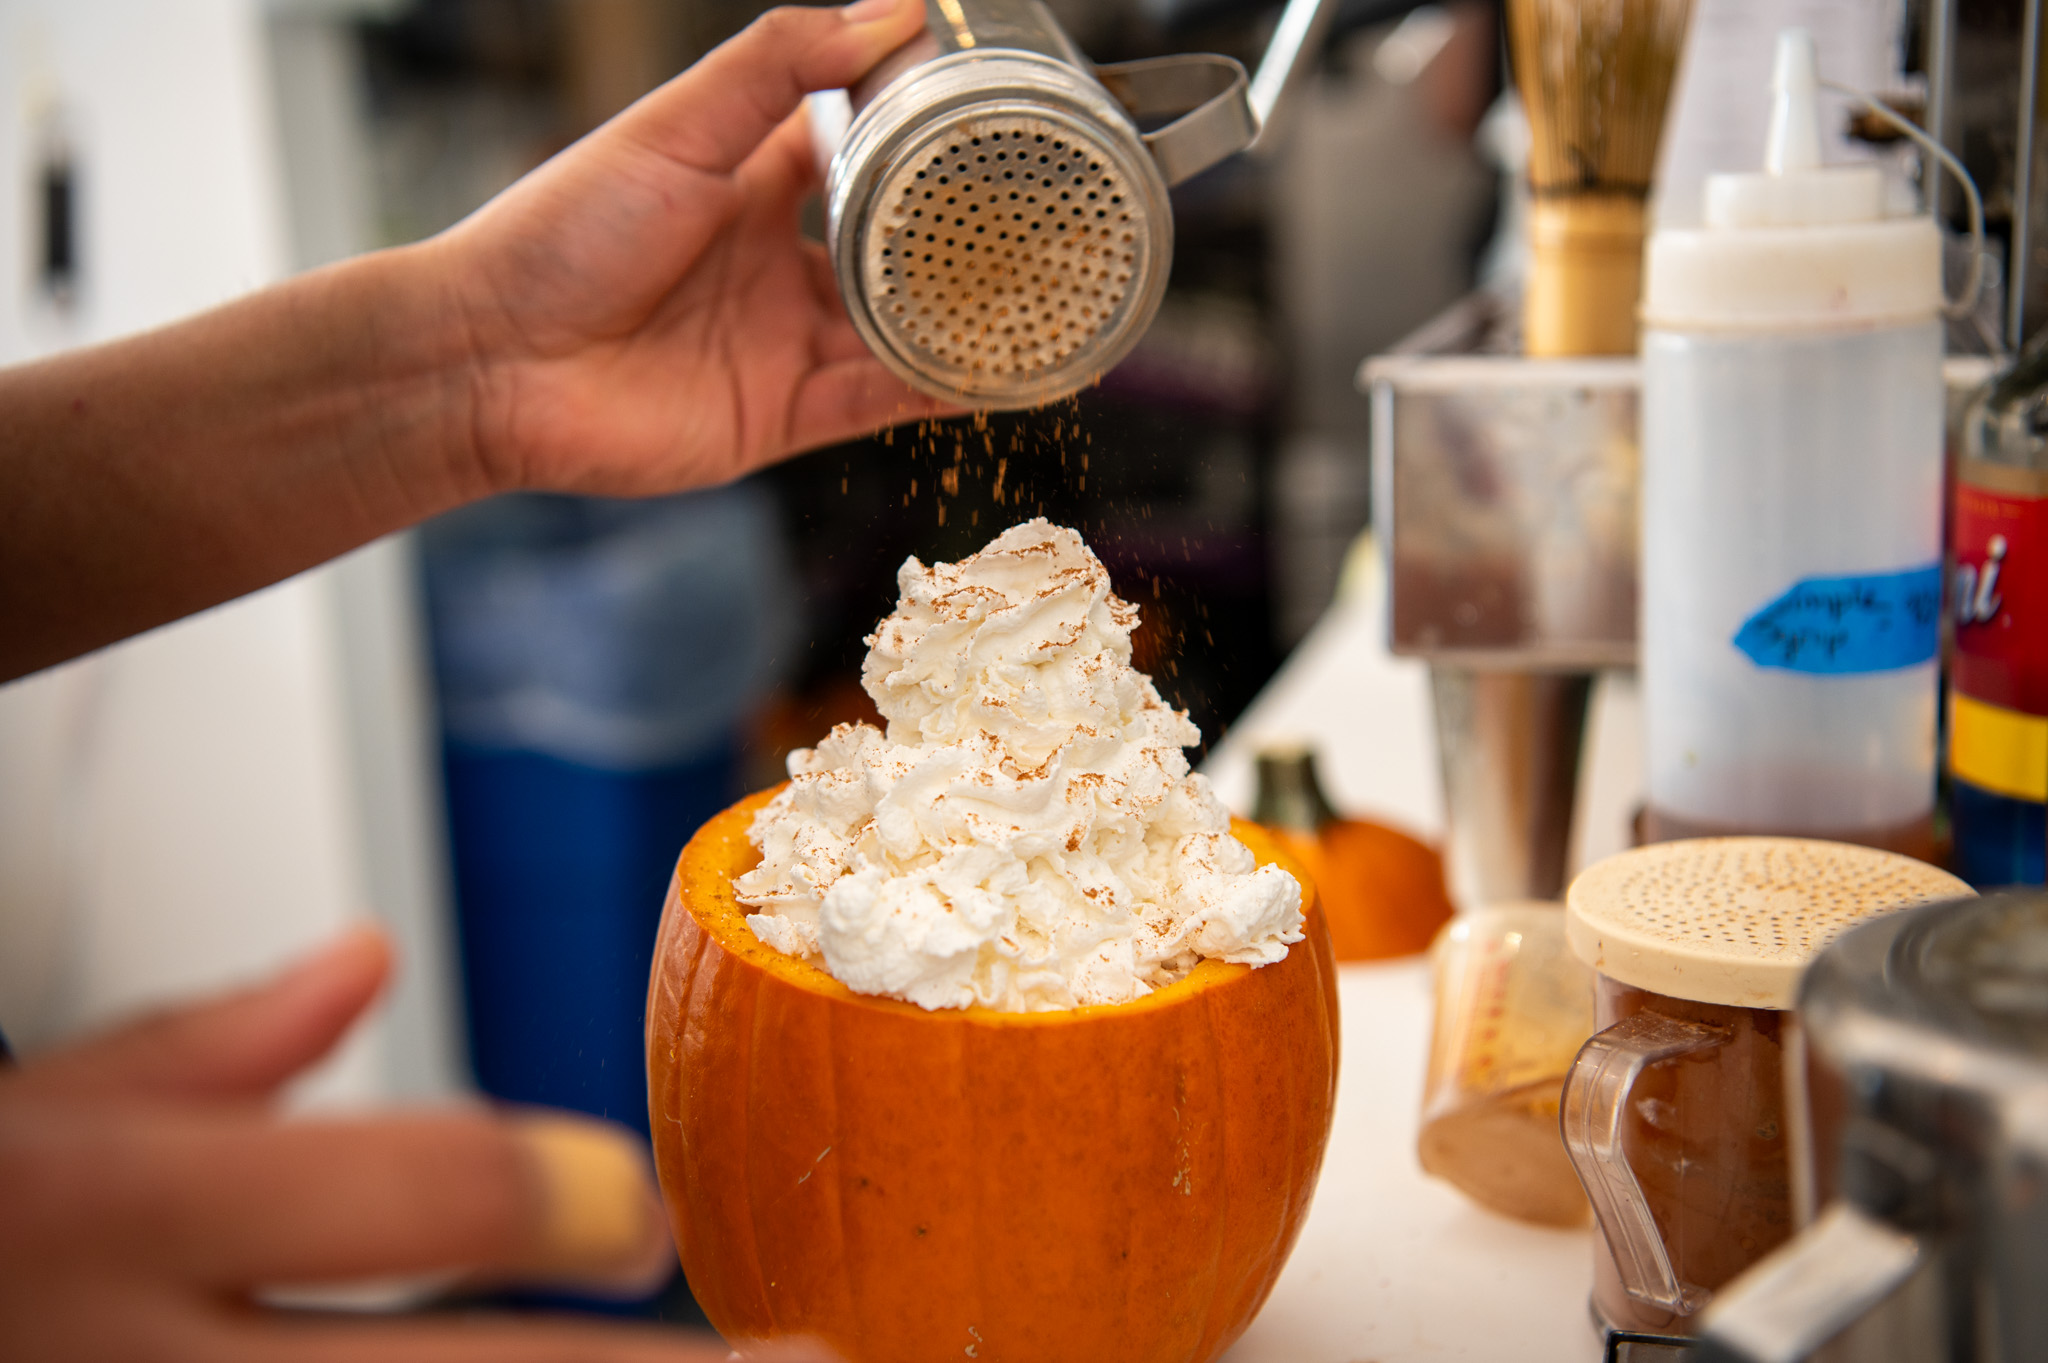 We tried the $23 pumpkin spice latte that everyone in San Francisco is talking about